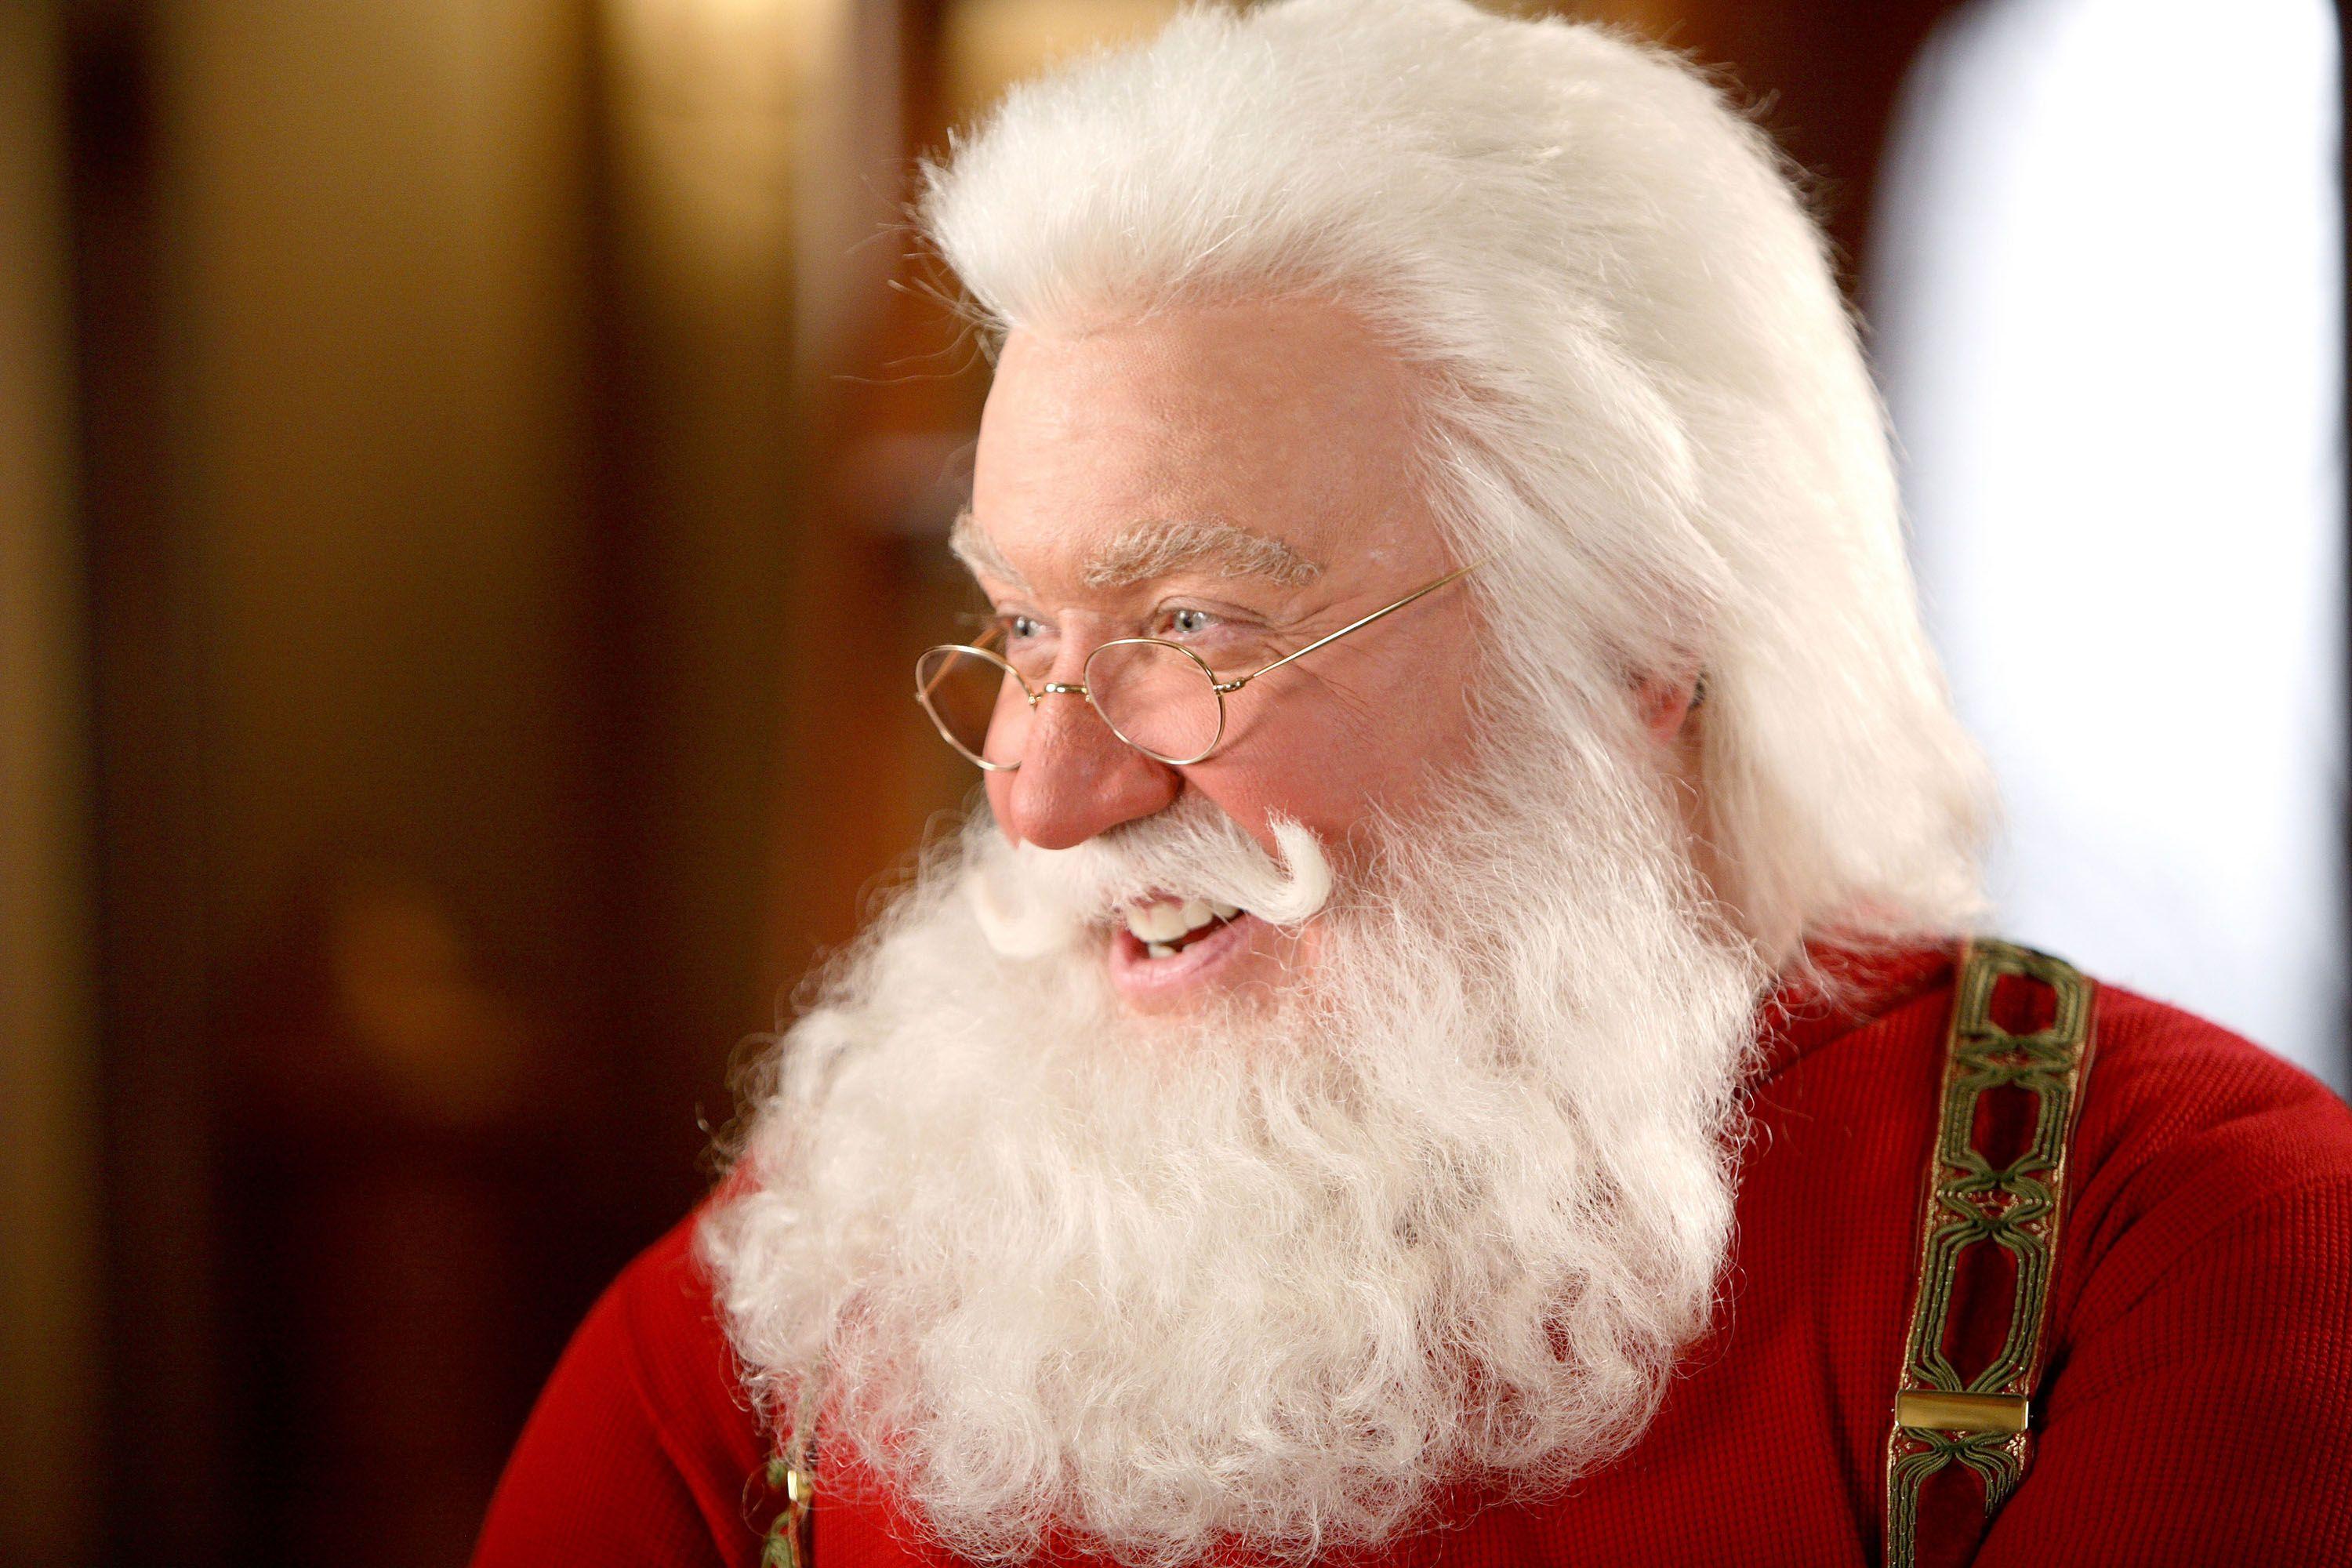 Tim Allen image The Santa Clause 3 HD wallpaper and background